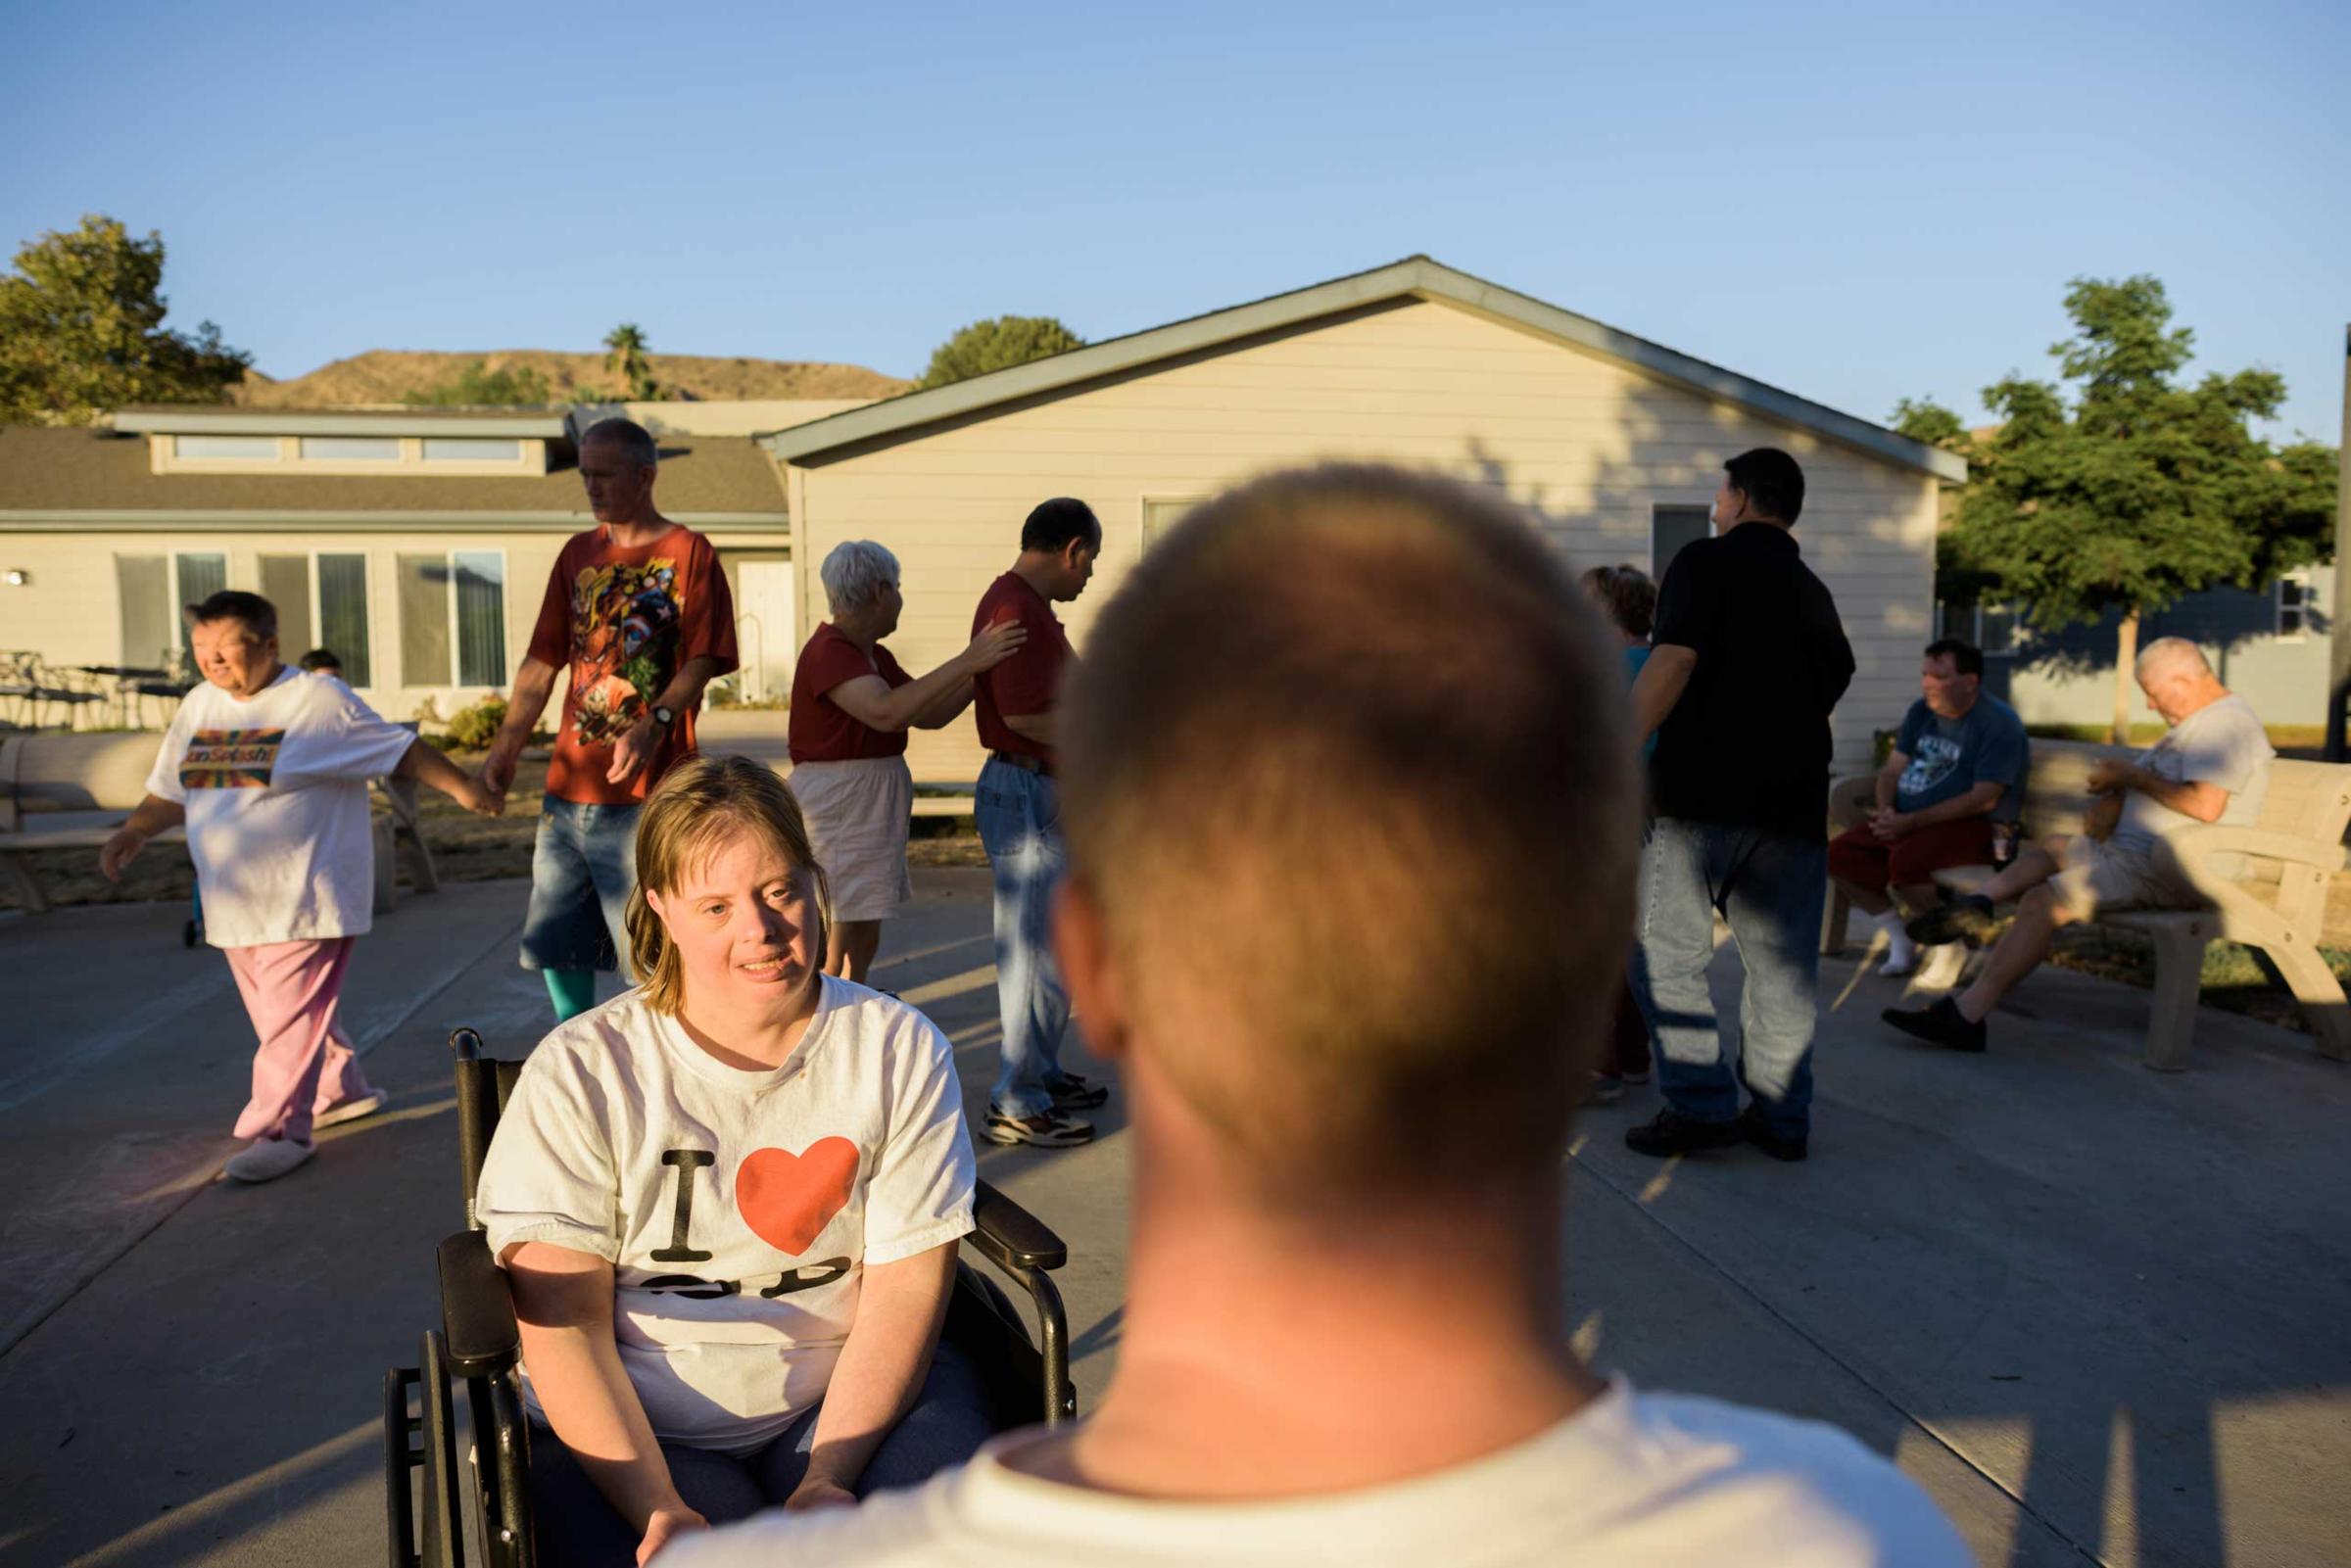 Krysta and Nathaniel sit together in front of their homes during an outside dance party with other community members.